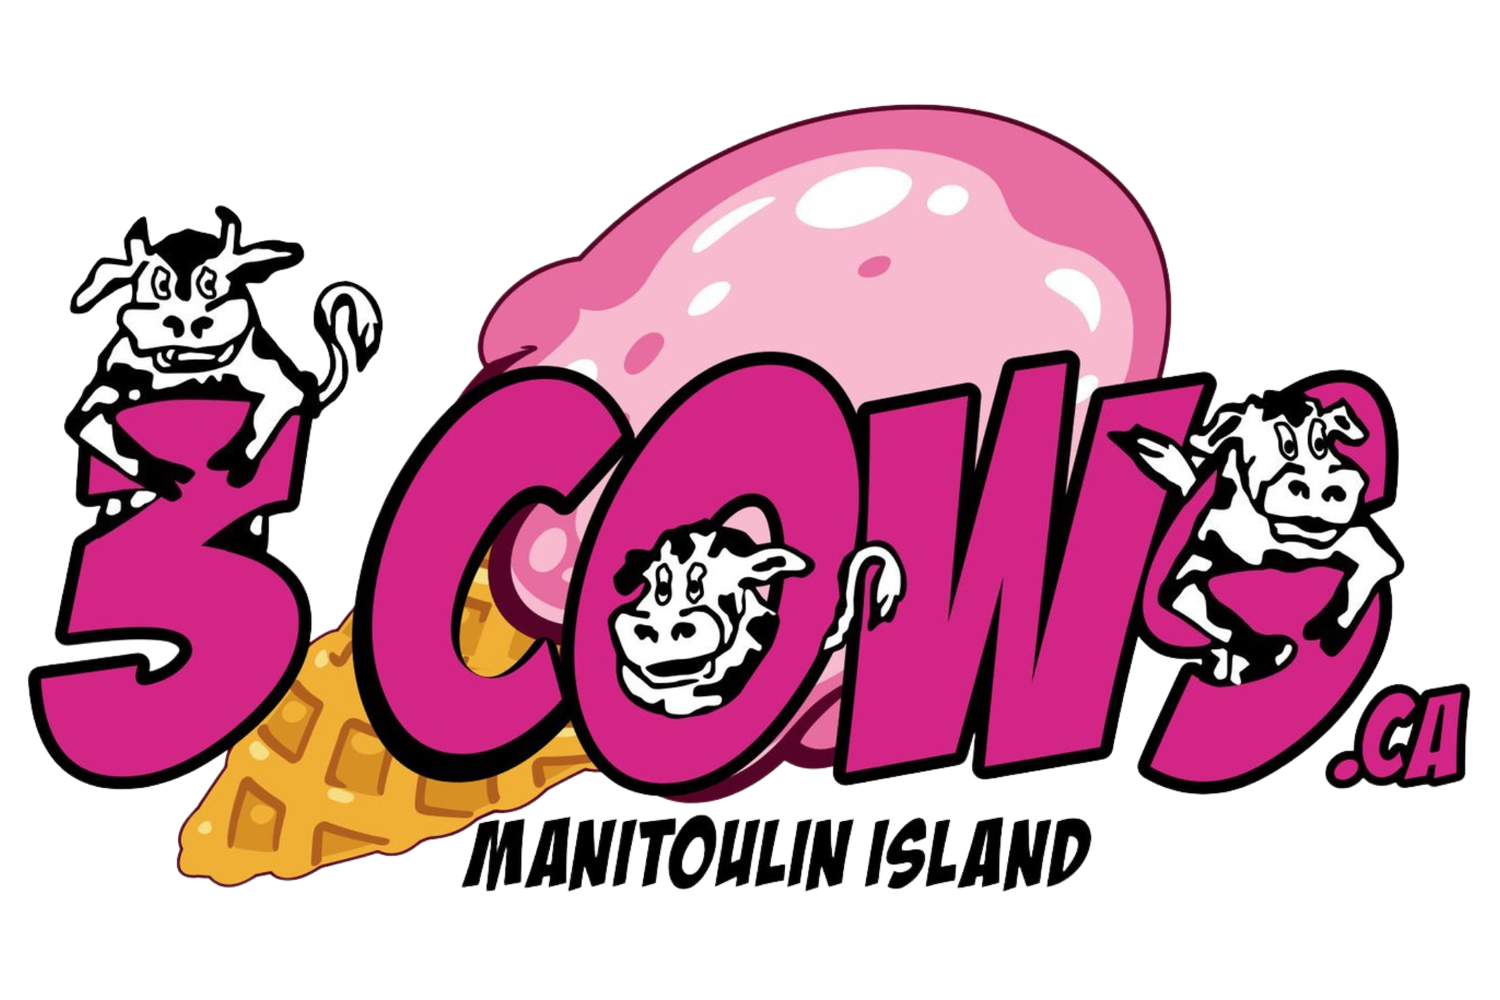 3 Cows and a Cone